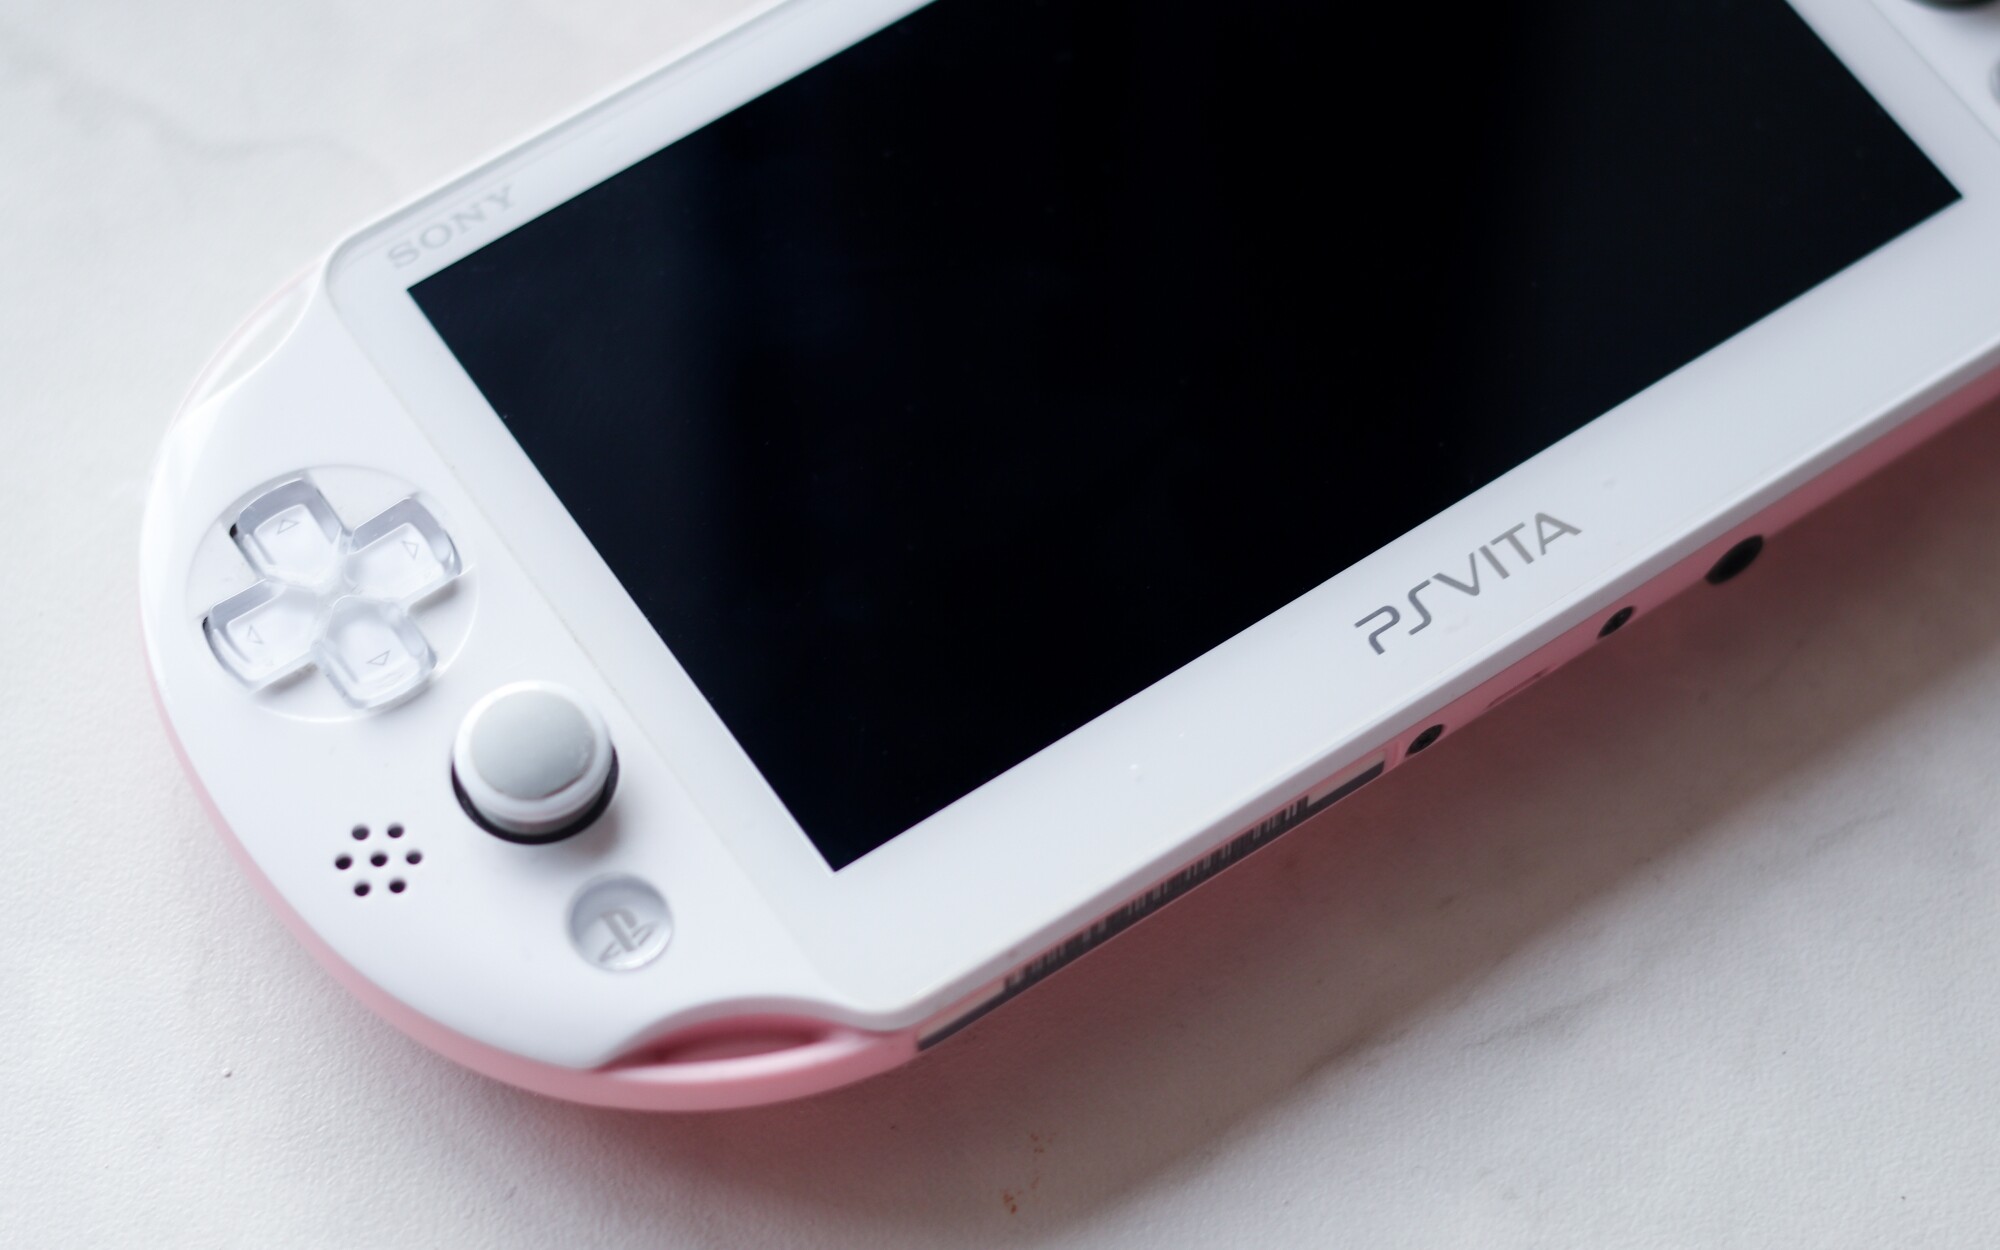 PlayStation Q Lite is “Sony’s new portable device”.  We know specifics